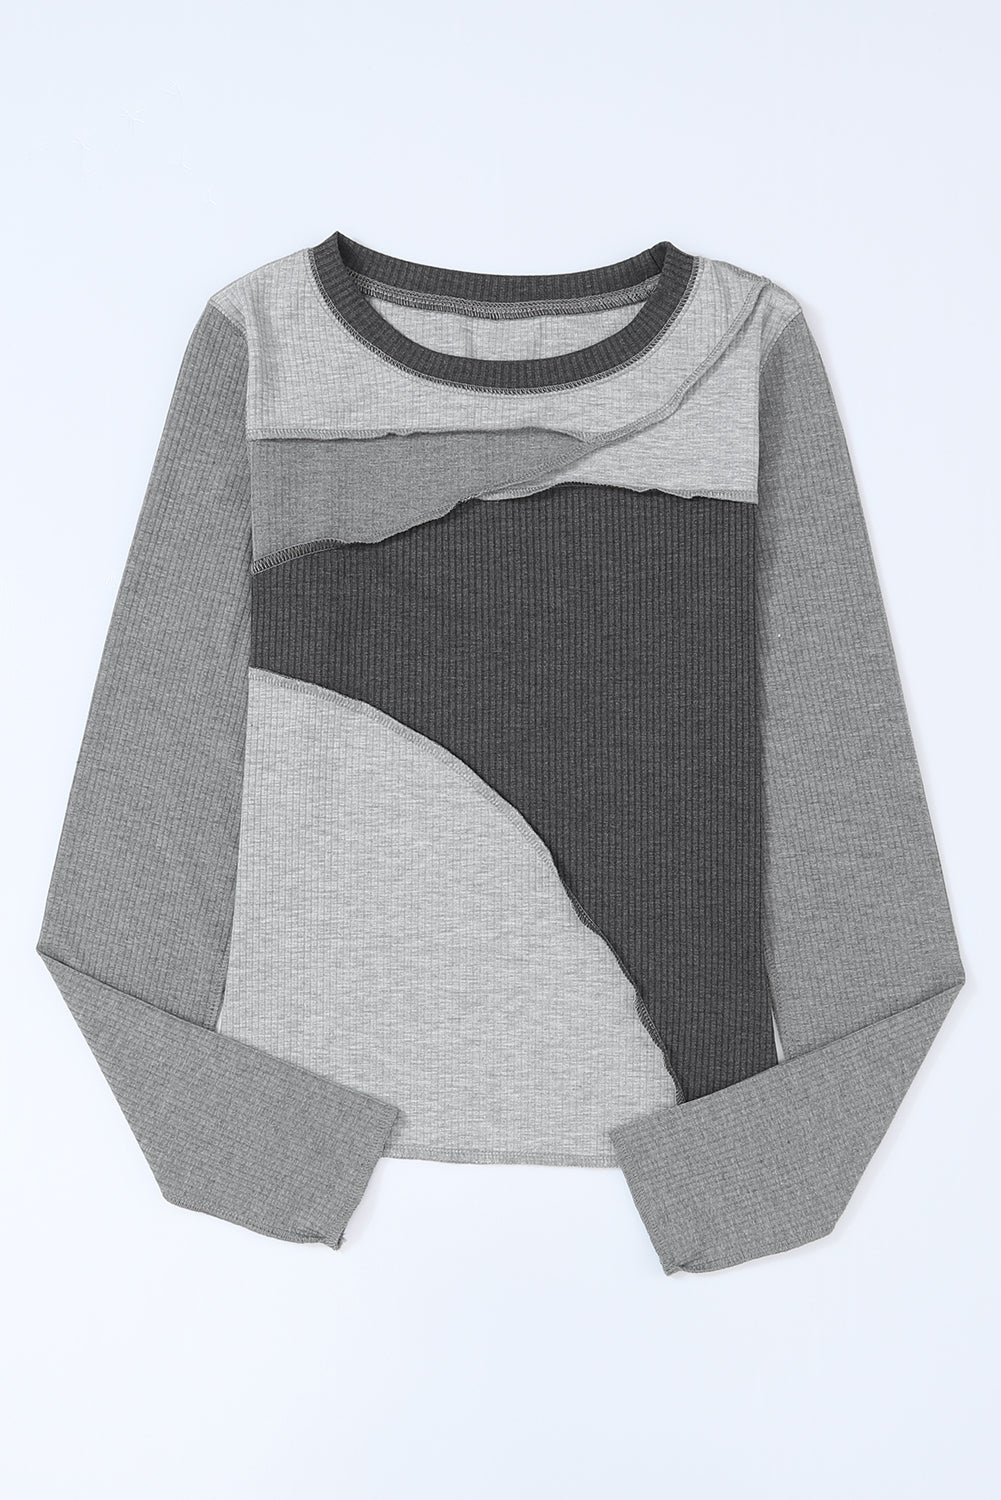 Exposed Seam Color Block Ribbed Knit Top